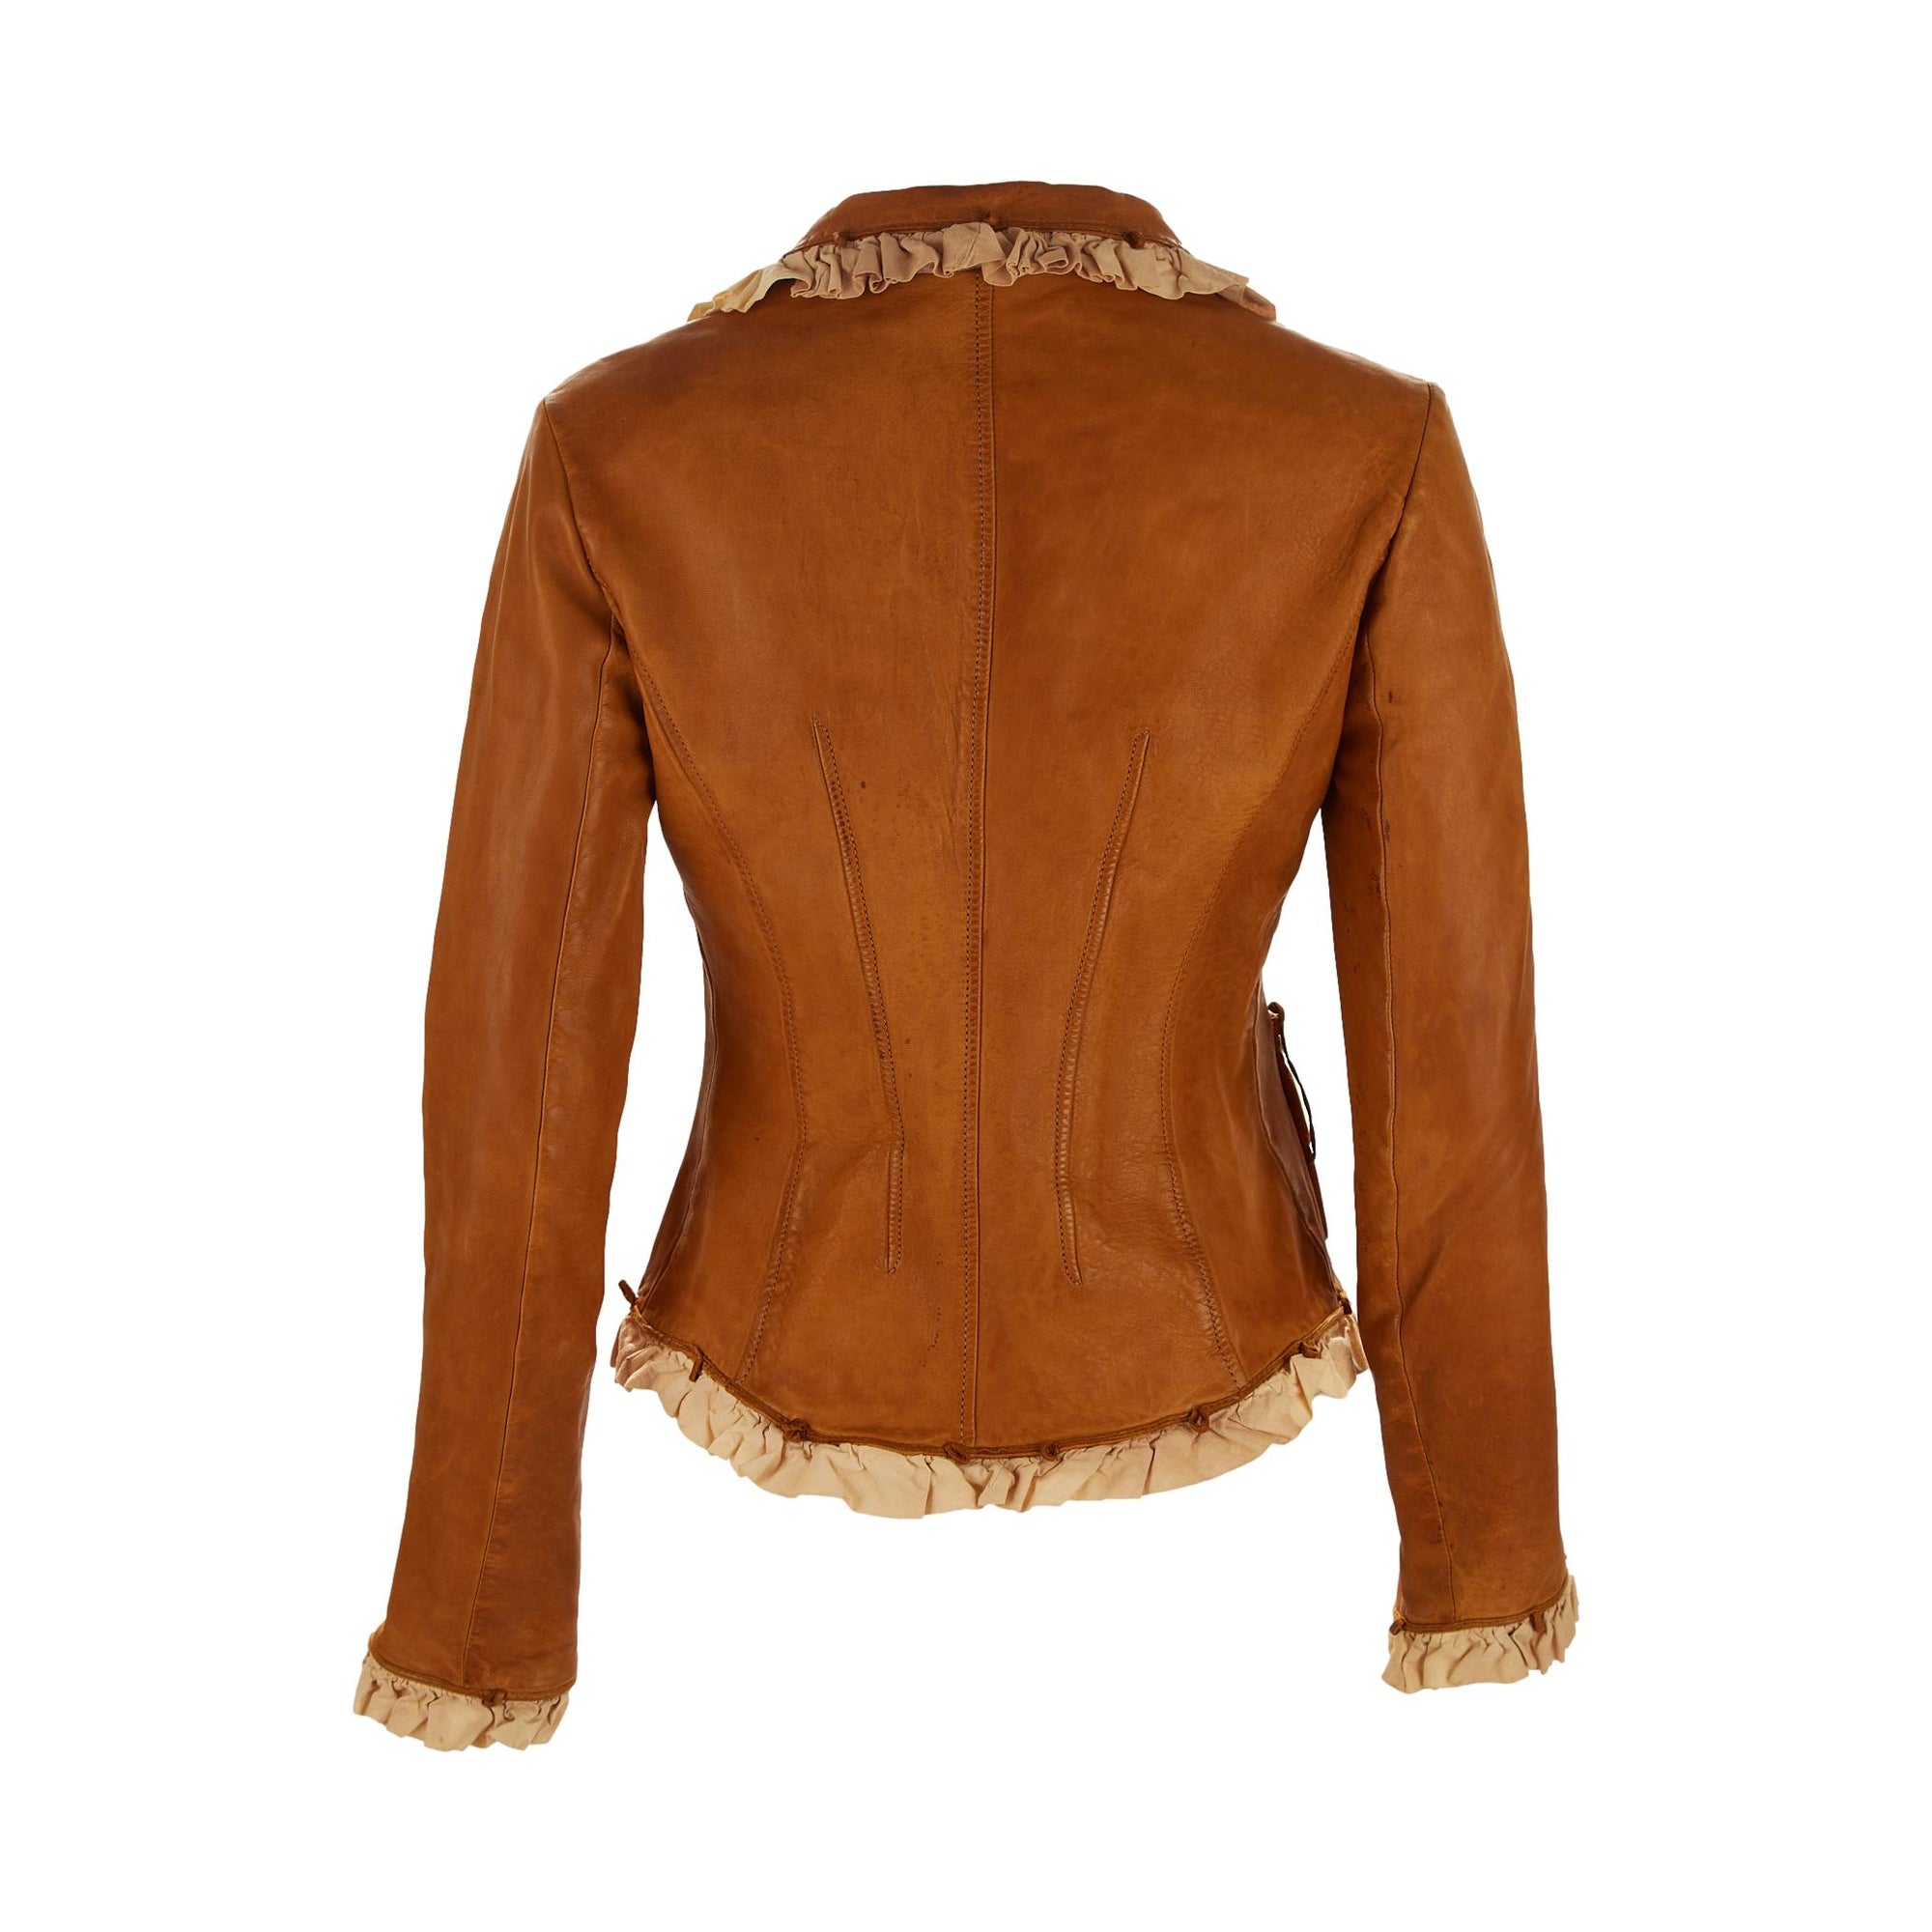 Galliano Brown Leather Jacket